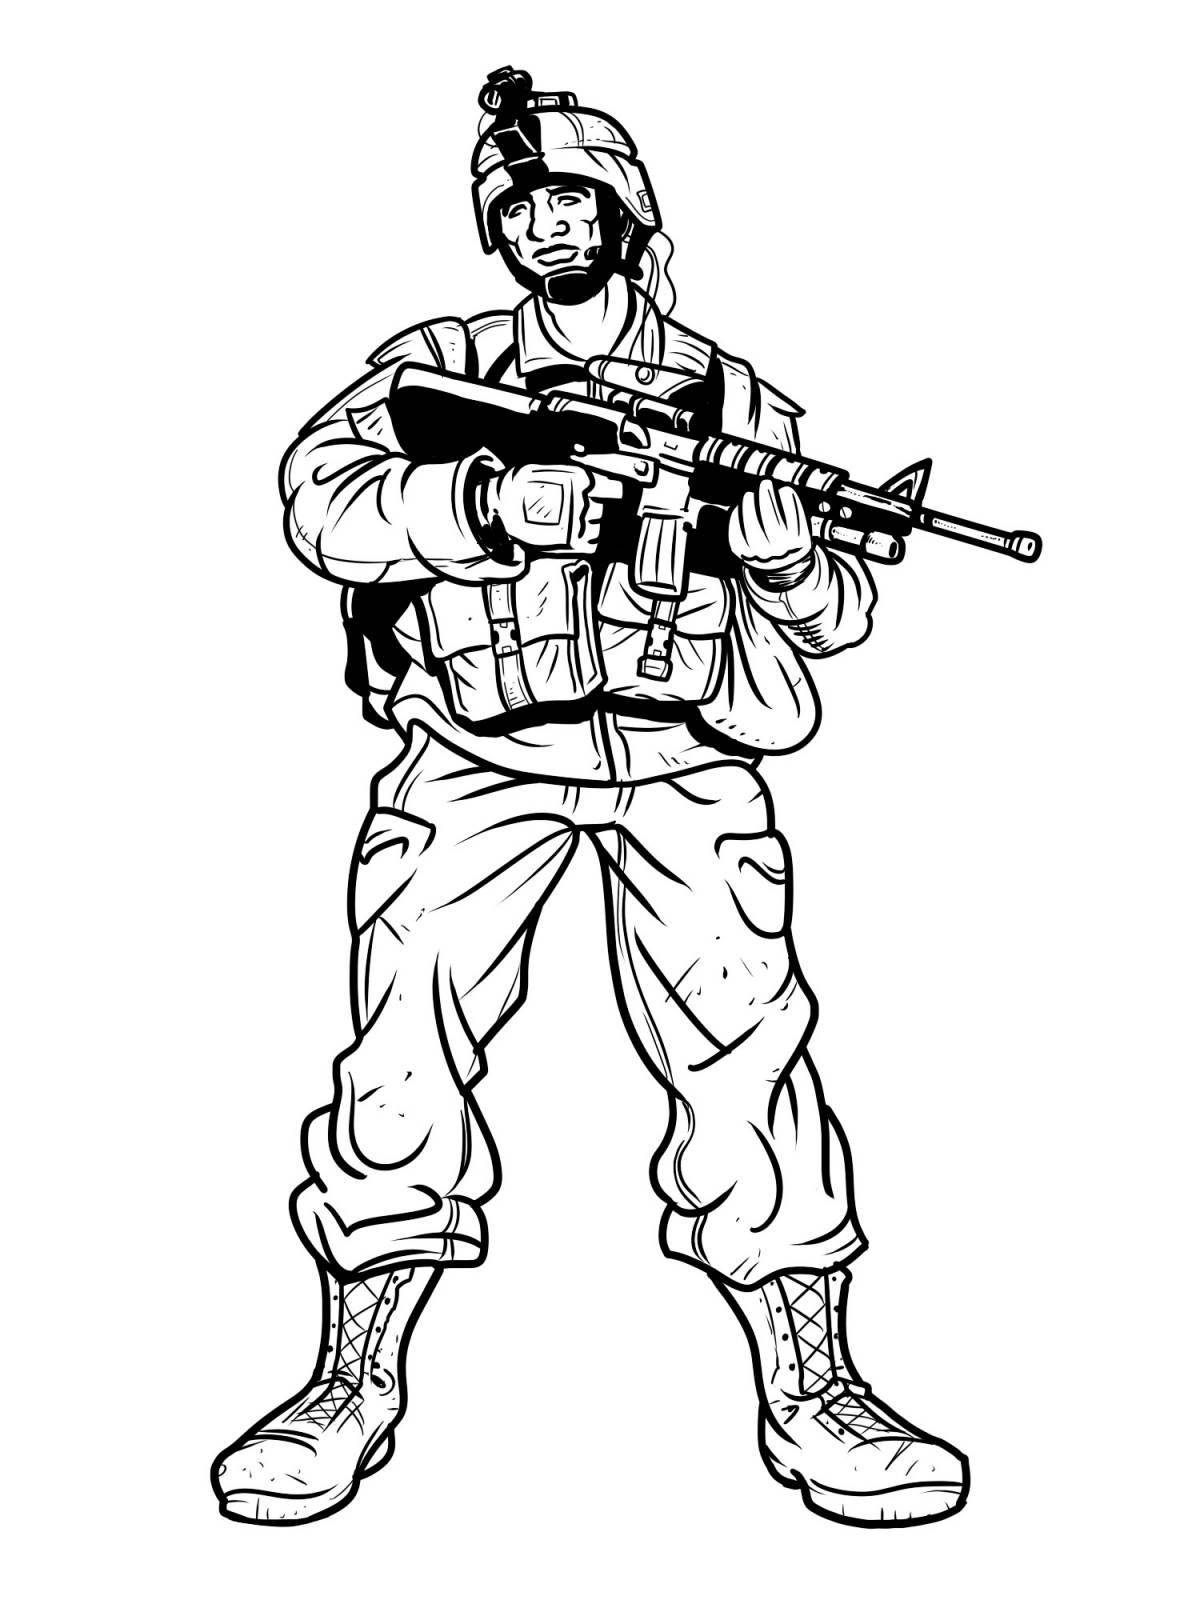 Brave military soldiers coloring book for kids